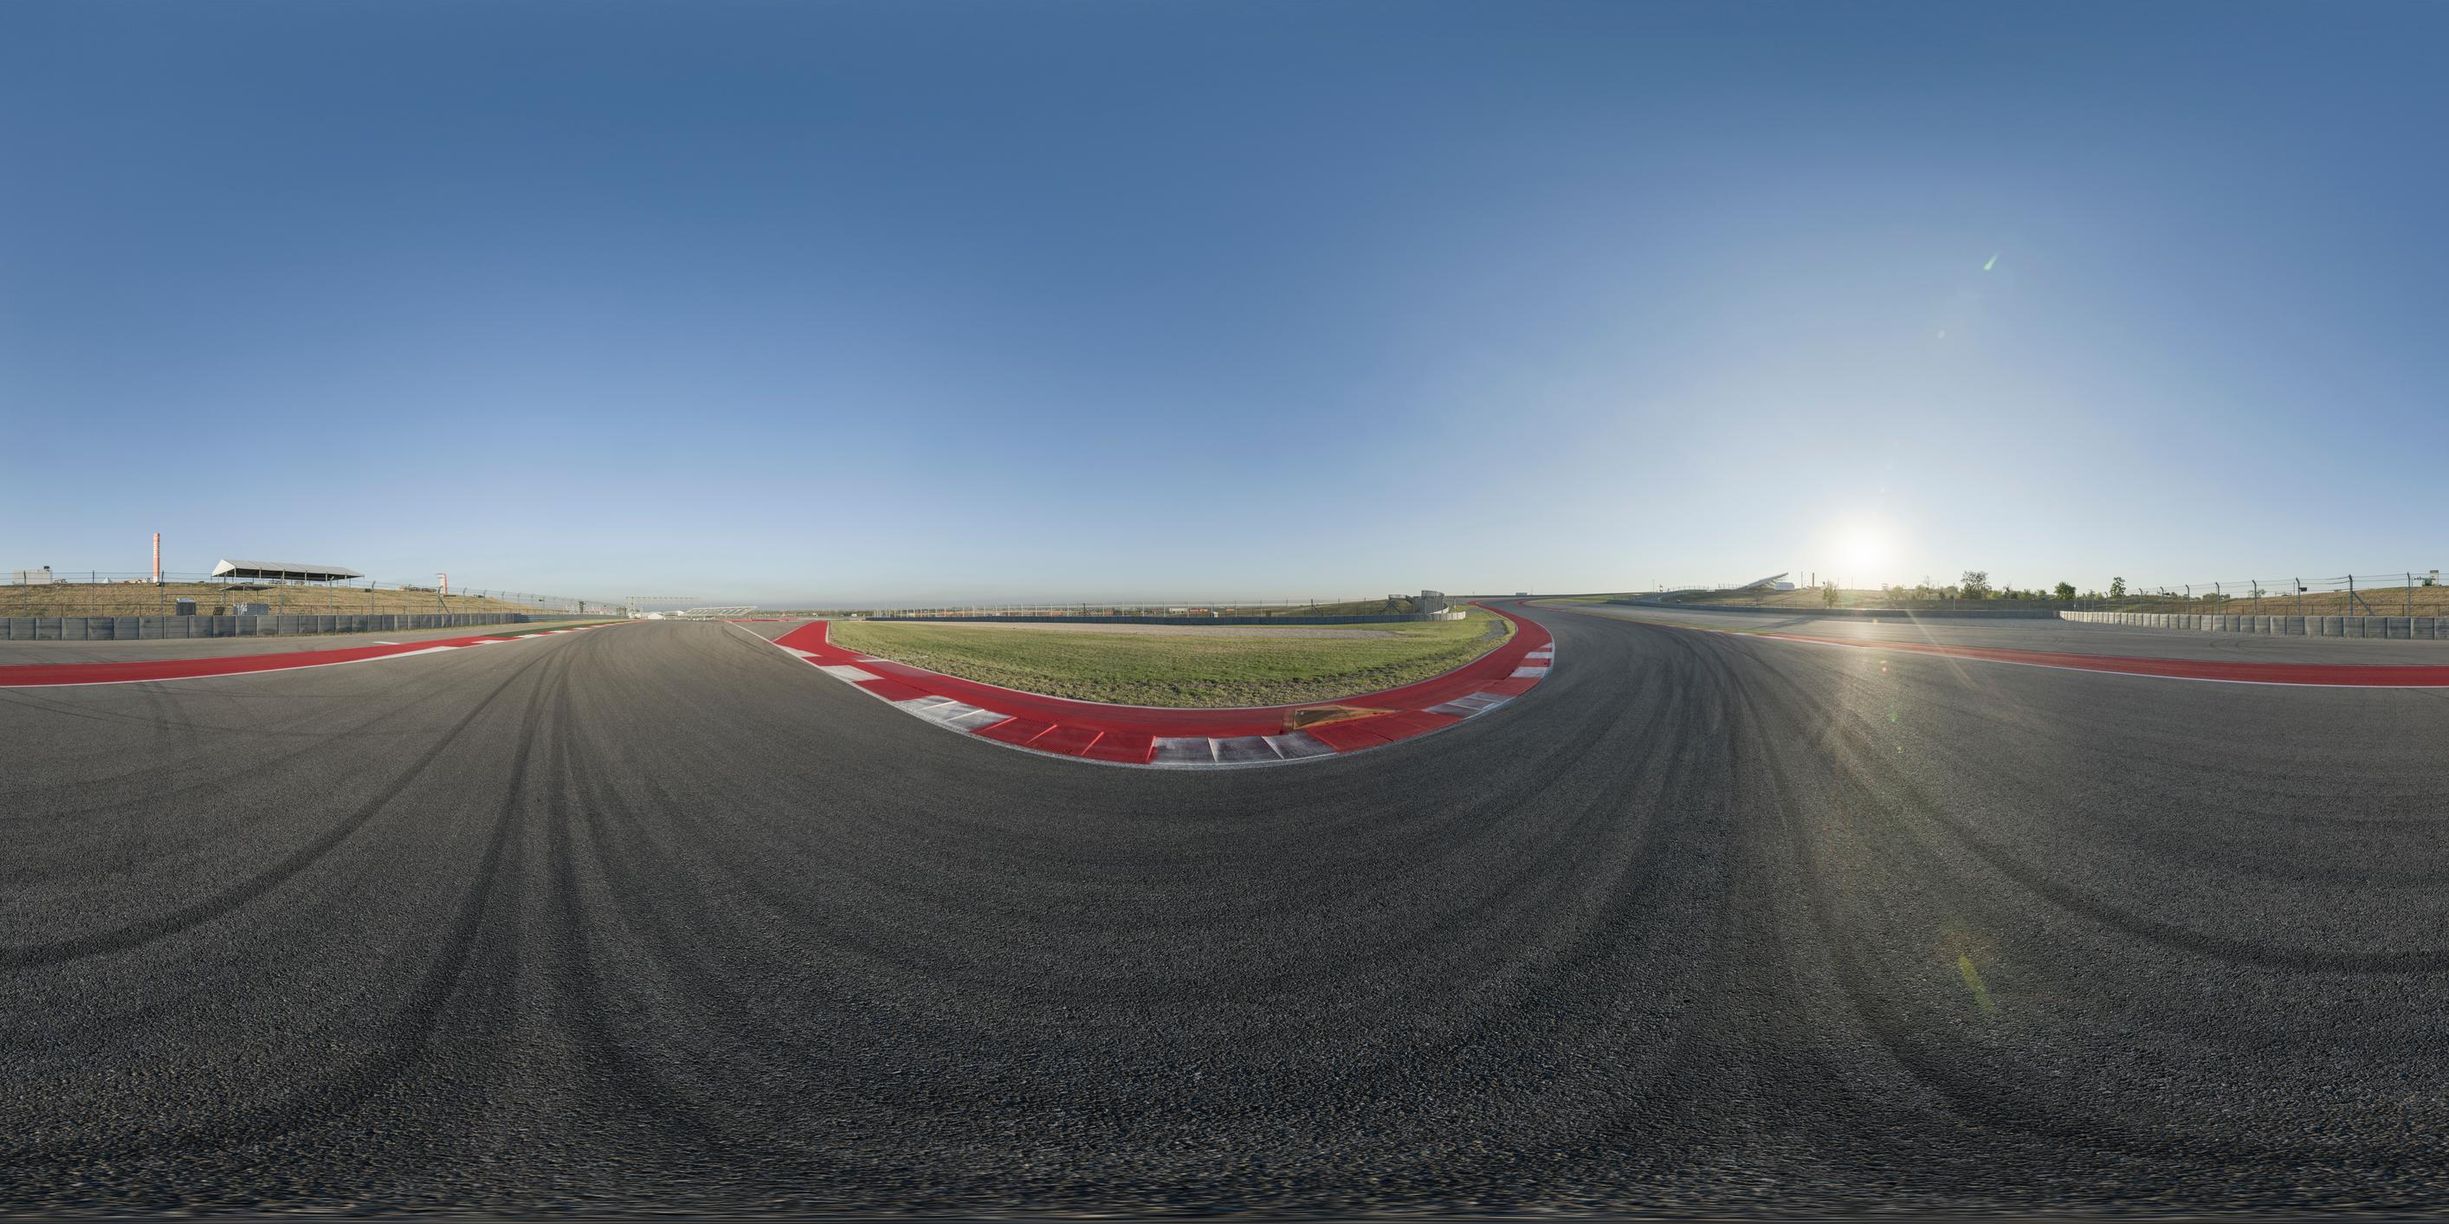 a view of a car racing around the track with sun in background while seen through the lens